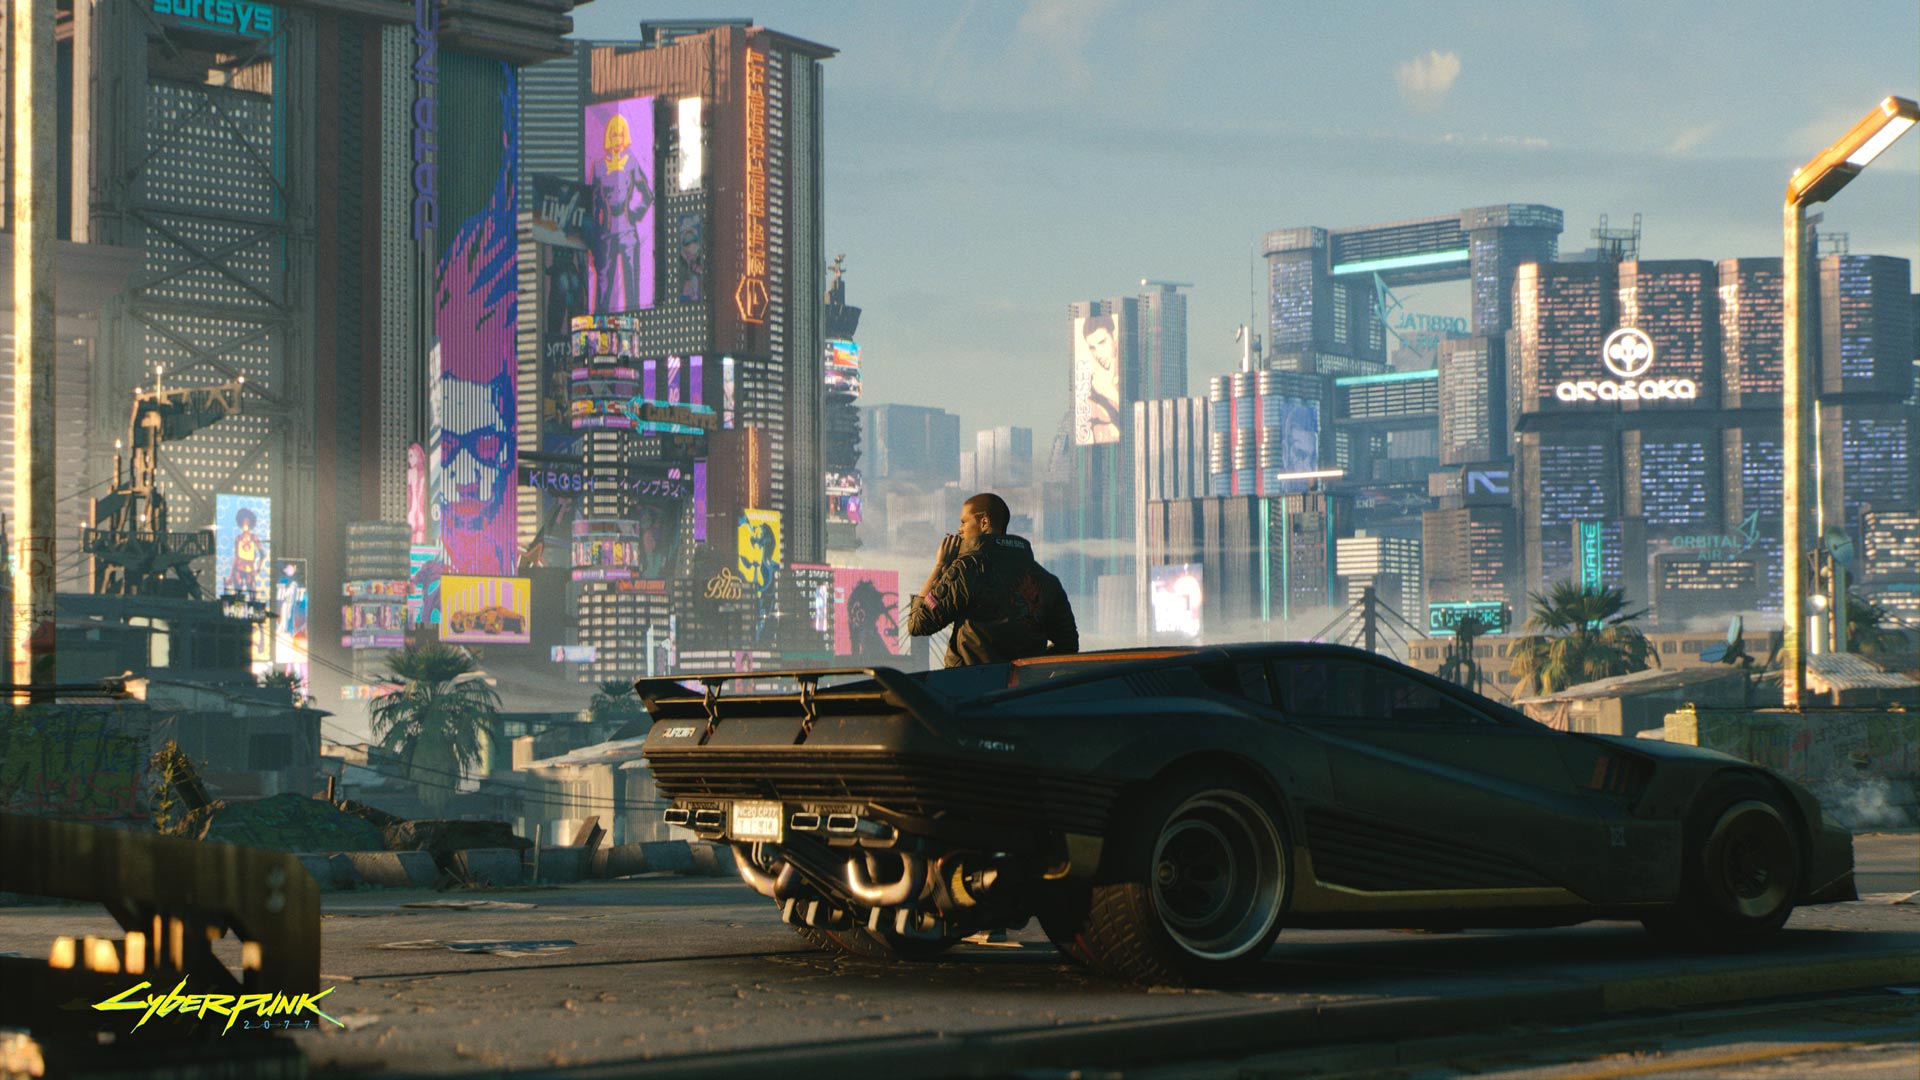 Cyberpunk 2077's gameplay reveal is live